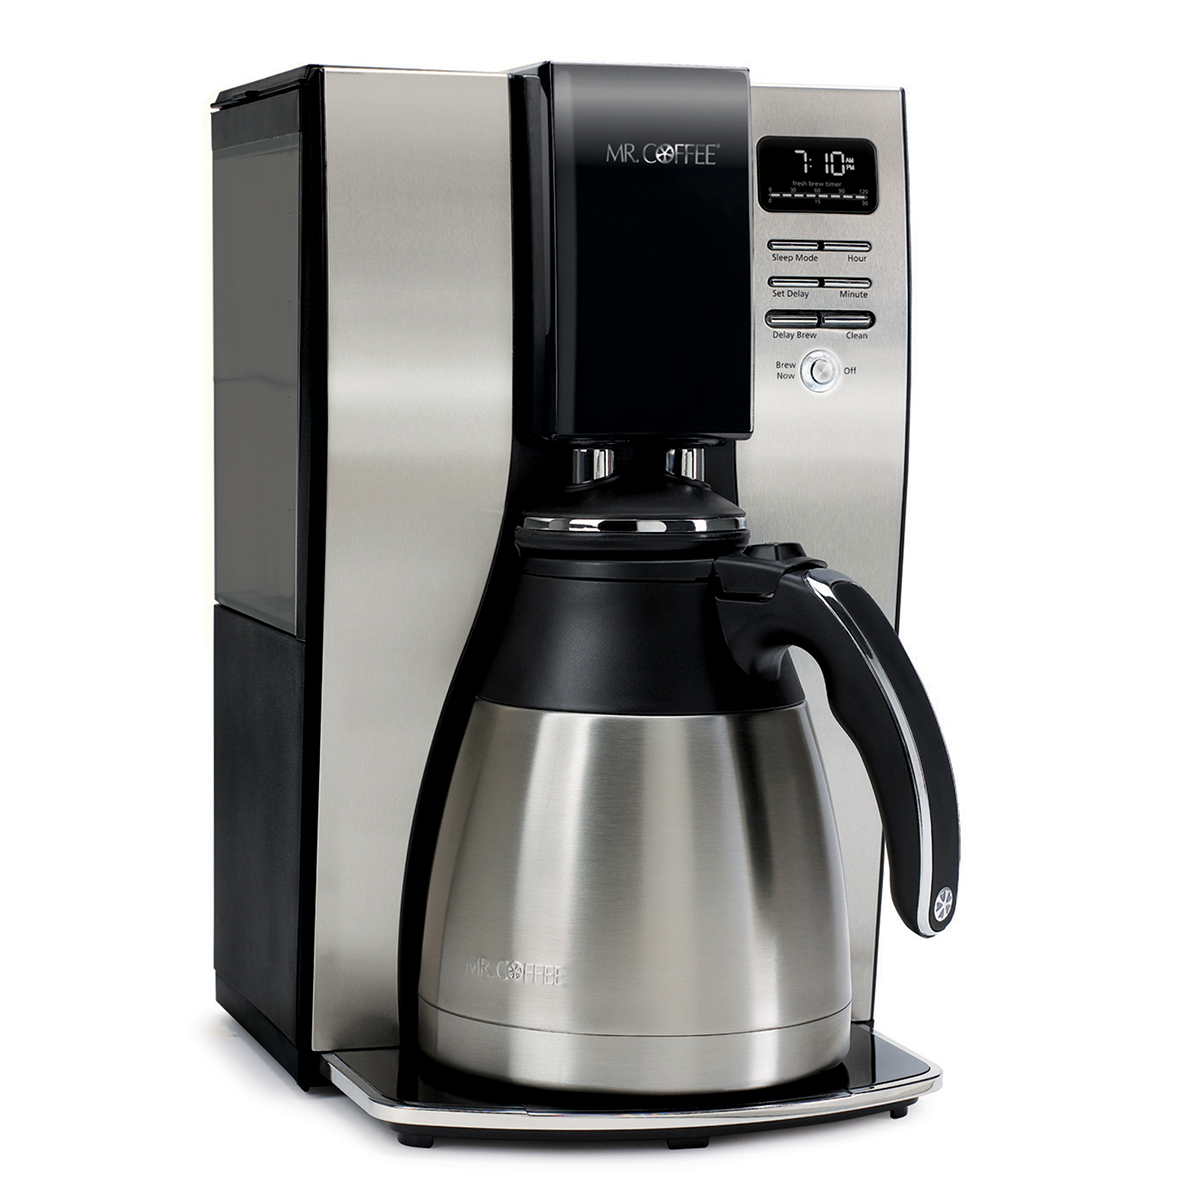  Mr. Coffee 12-Cup Programmable Coffee Maker with Brew